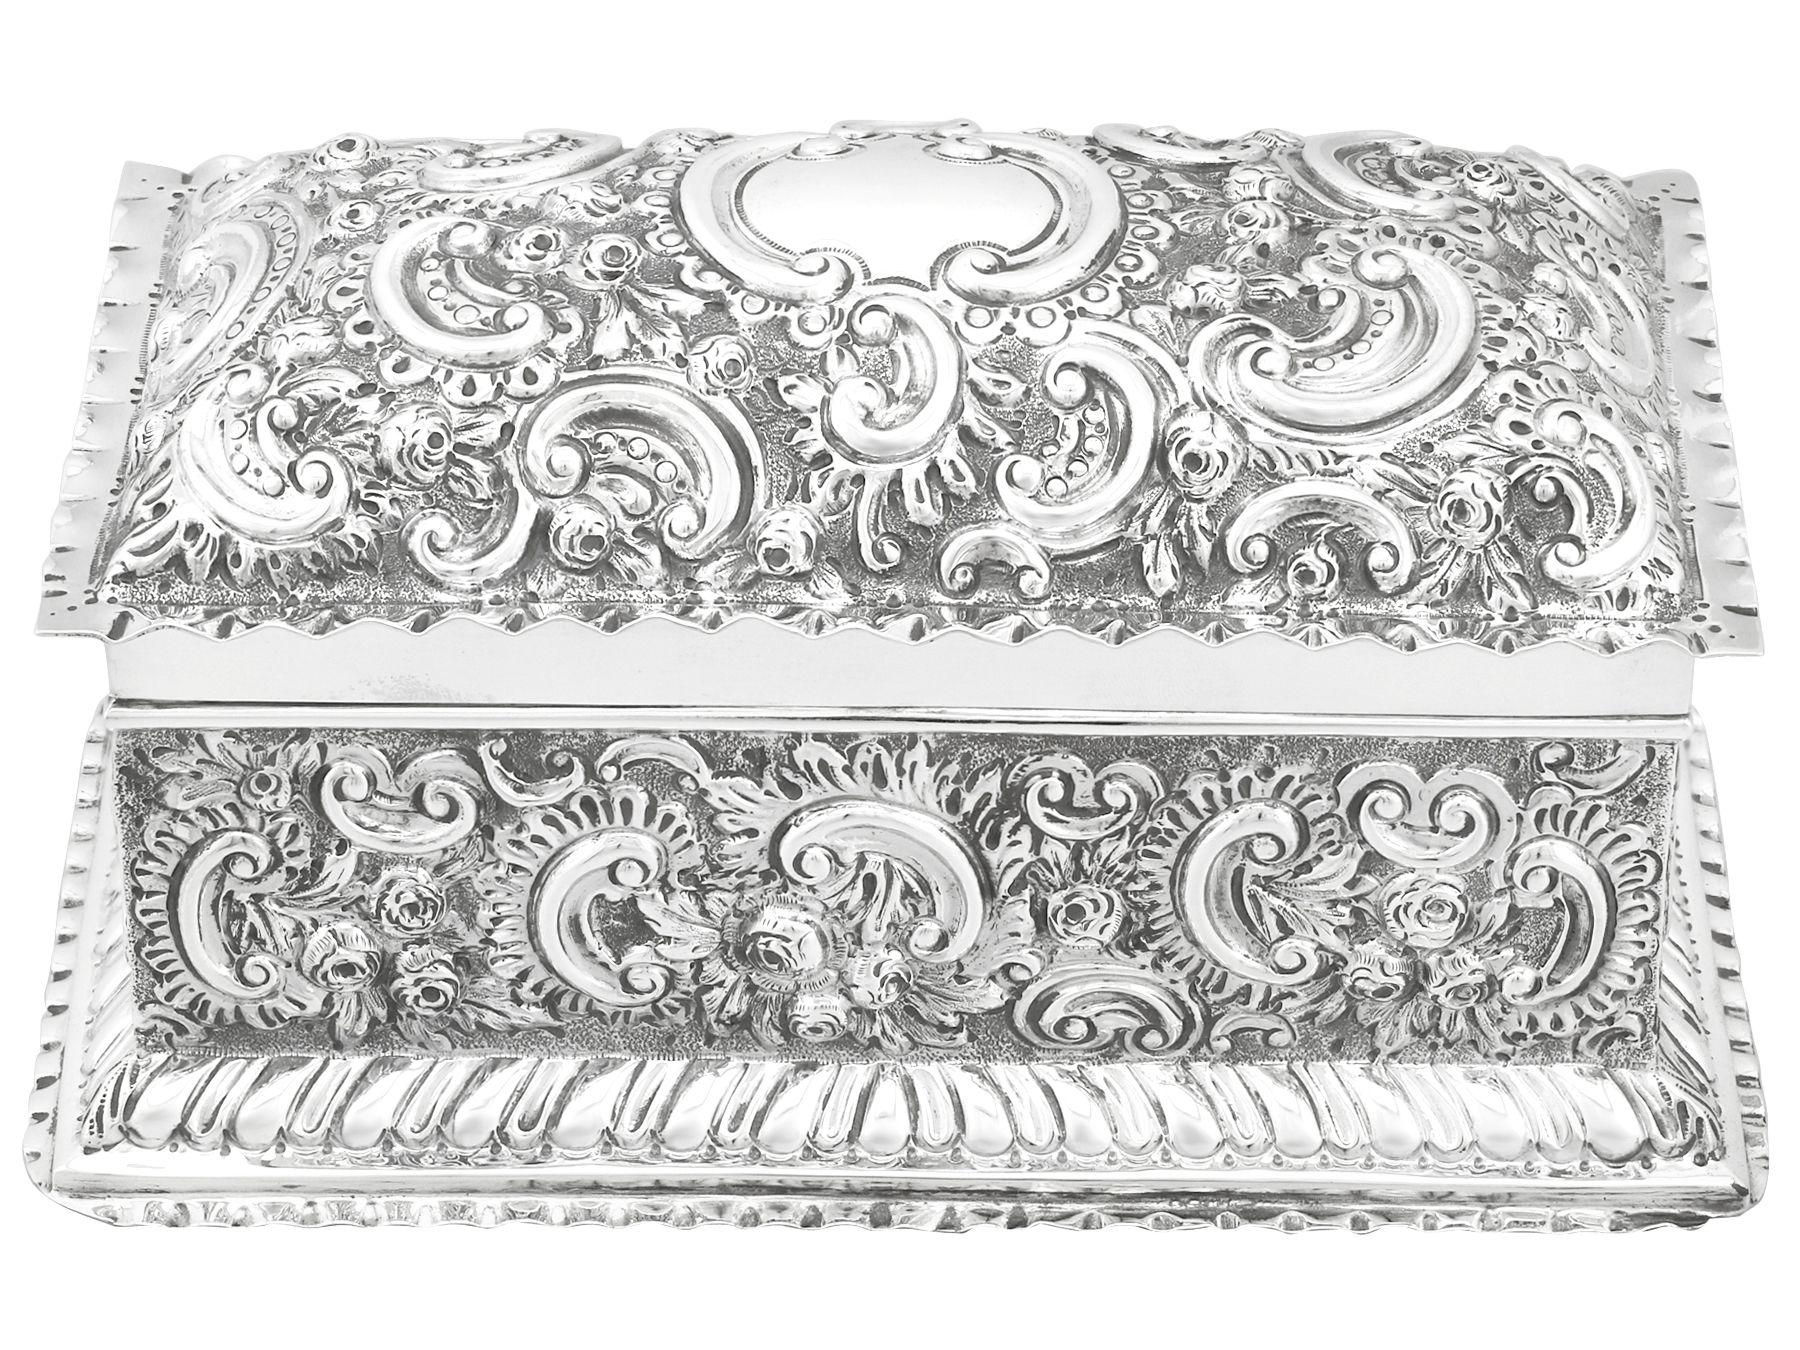 An exceptional, fine and impressive antique Victorian English sterling silver jewelry box; an addition to the ornamental silverware collection.

This exceptional antique sterling silver jewelry casket has a rectangular shaped form.

The surface